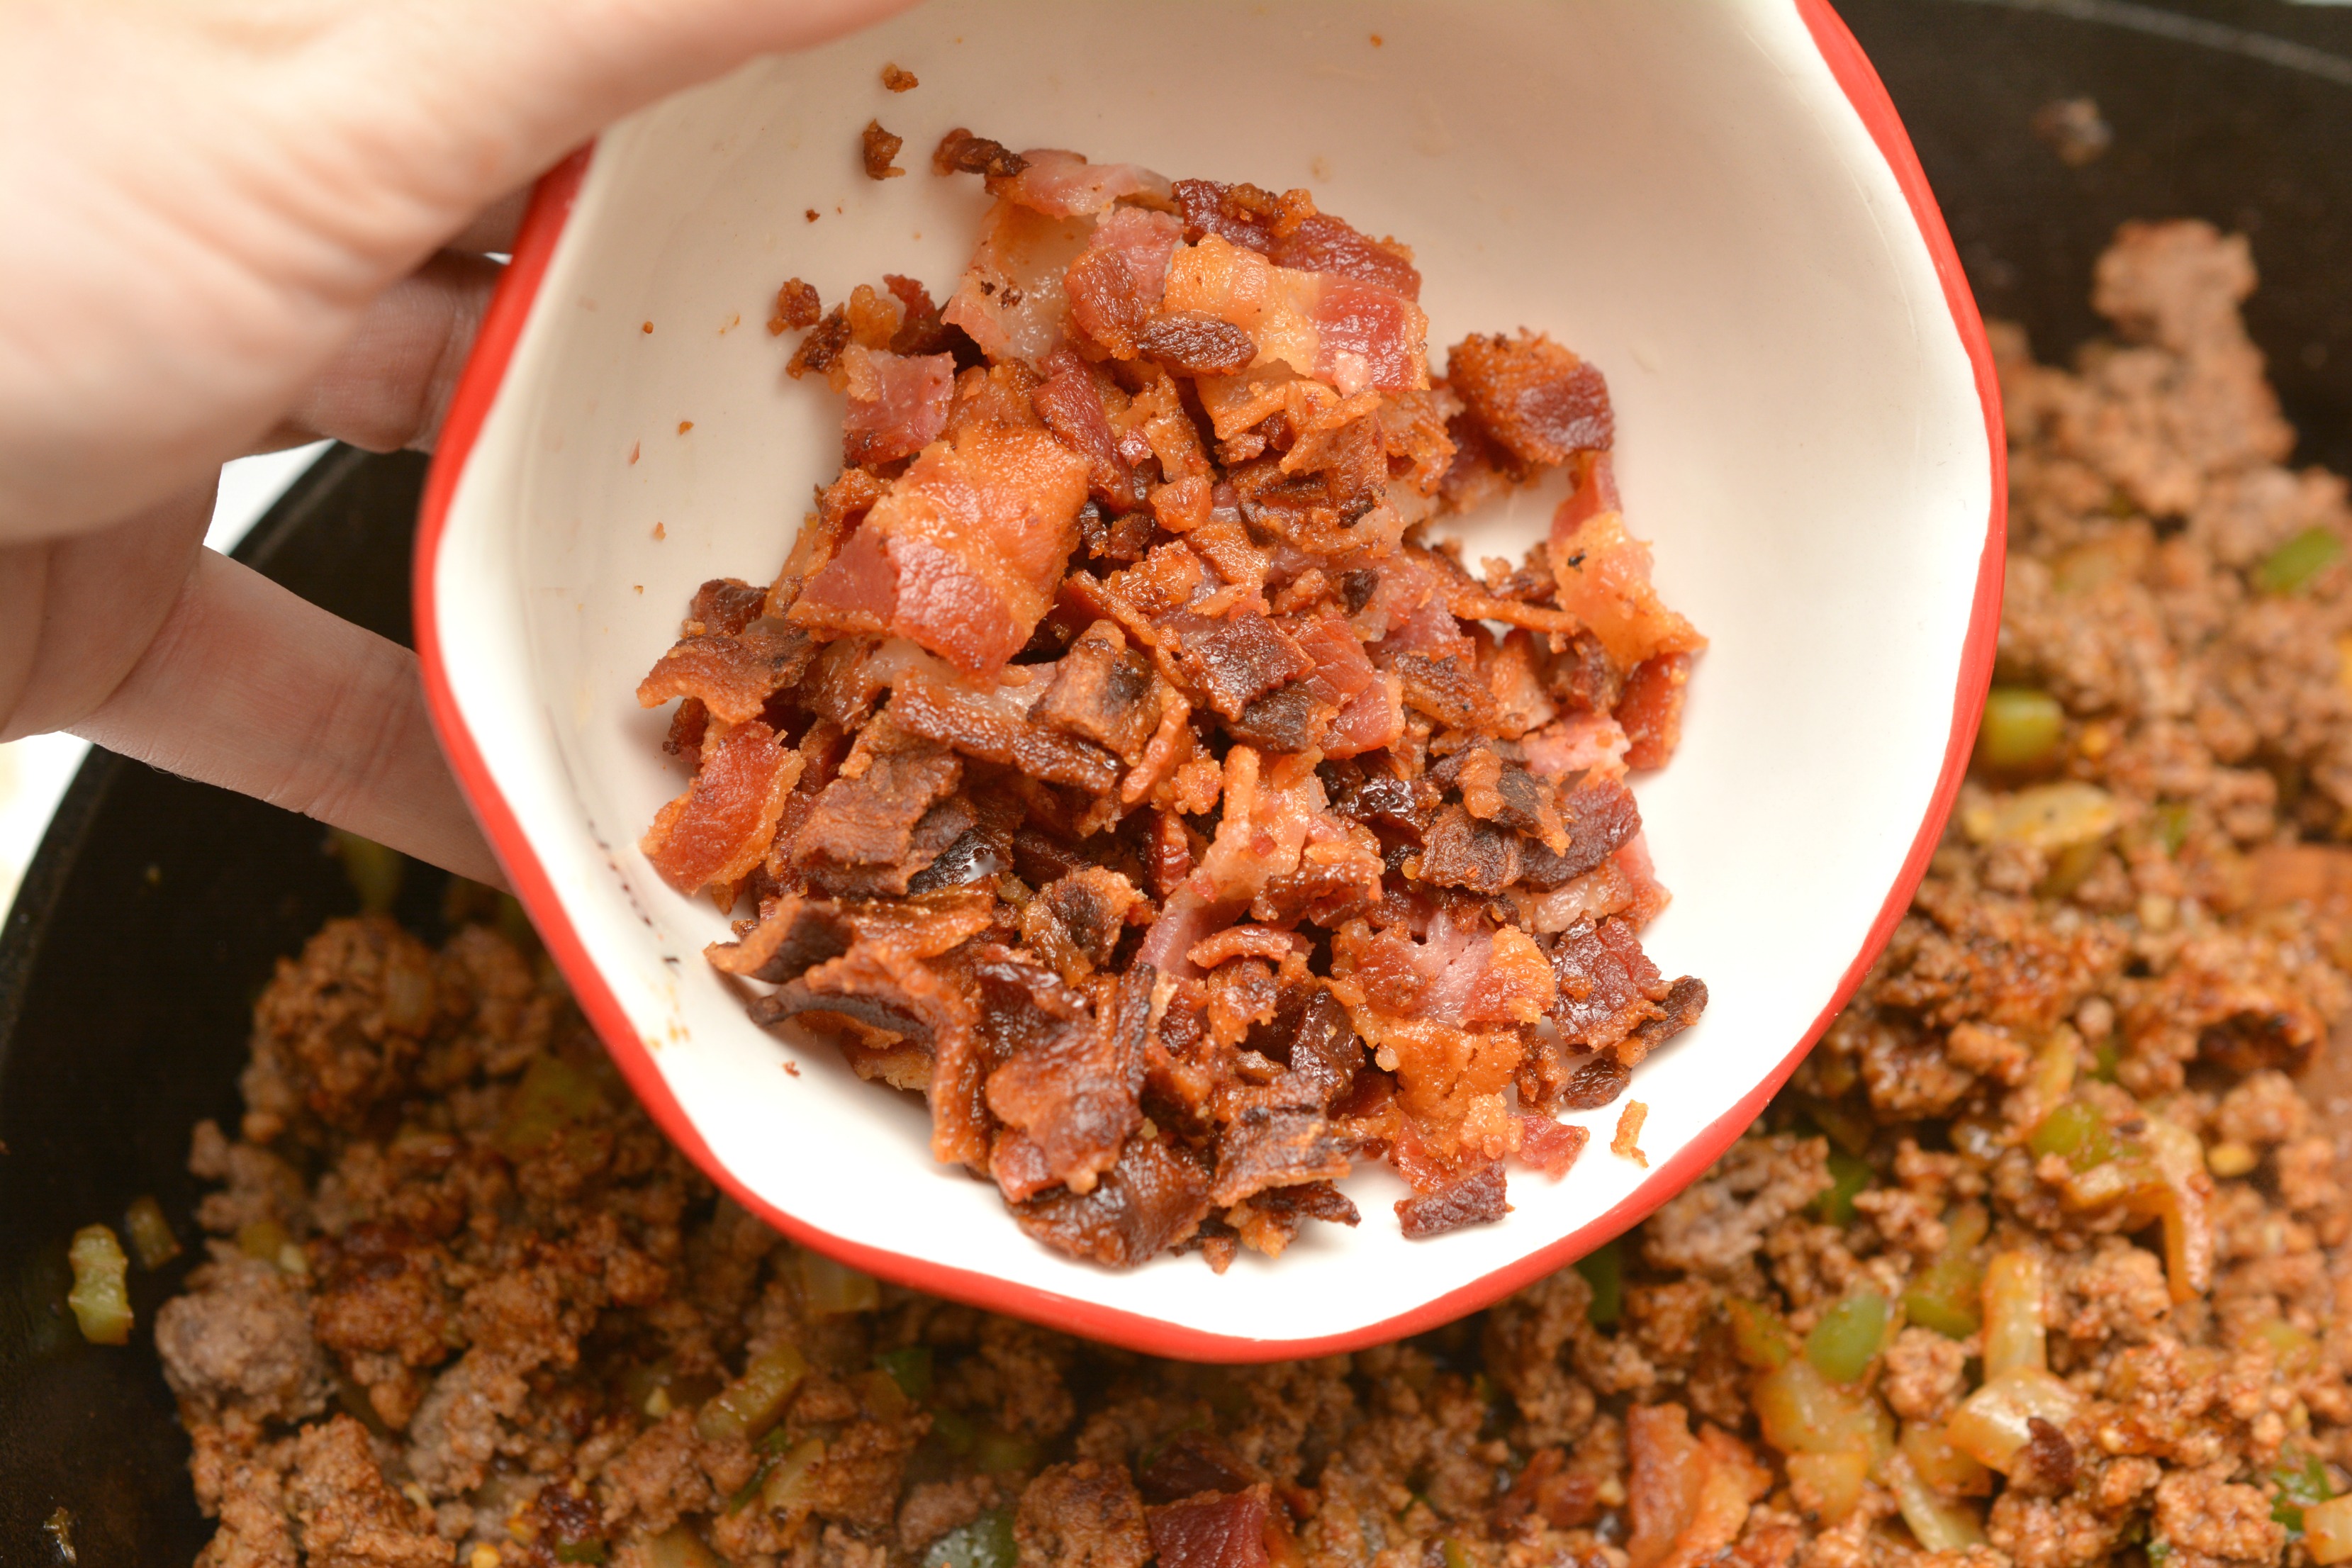 Such a great low carb recipe! With this keto chili recipe, you will not miss anything that would be in a traditional chili recipe, and better yet, it features bacon. I mean, BACON. This keto chili recipe is going to become a family loved favorite and a true comfort food.